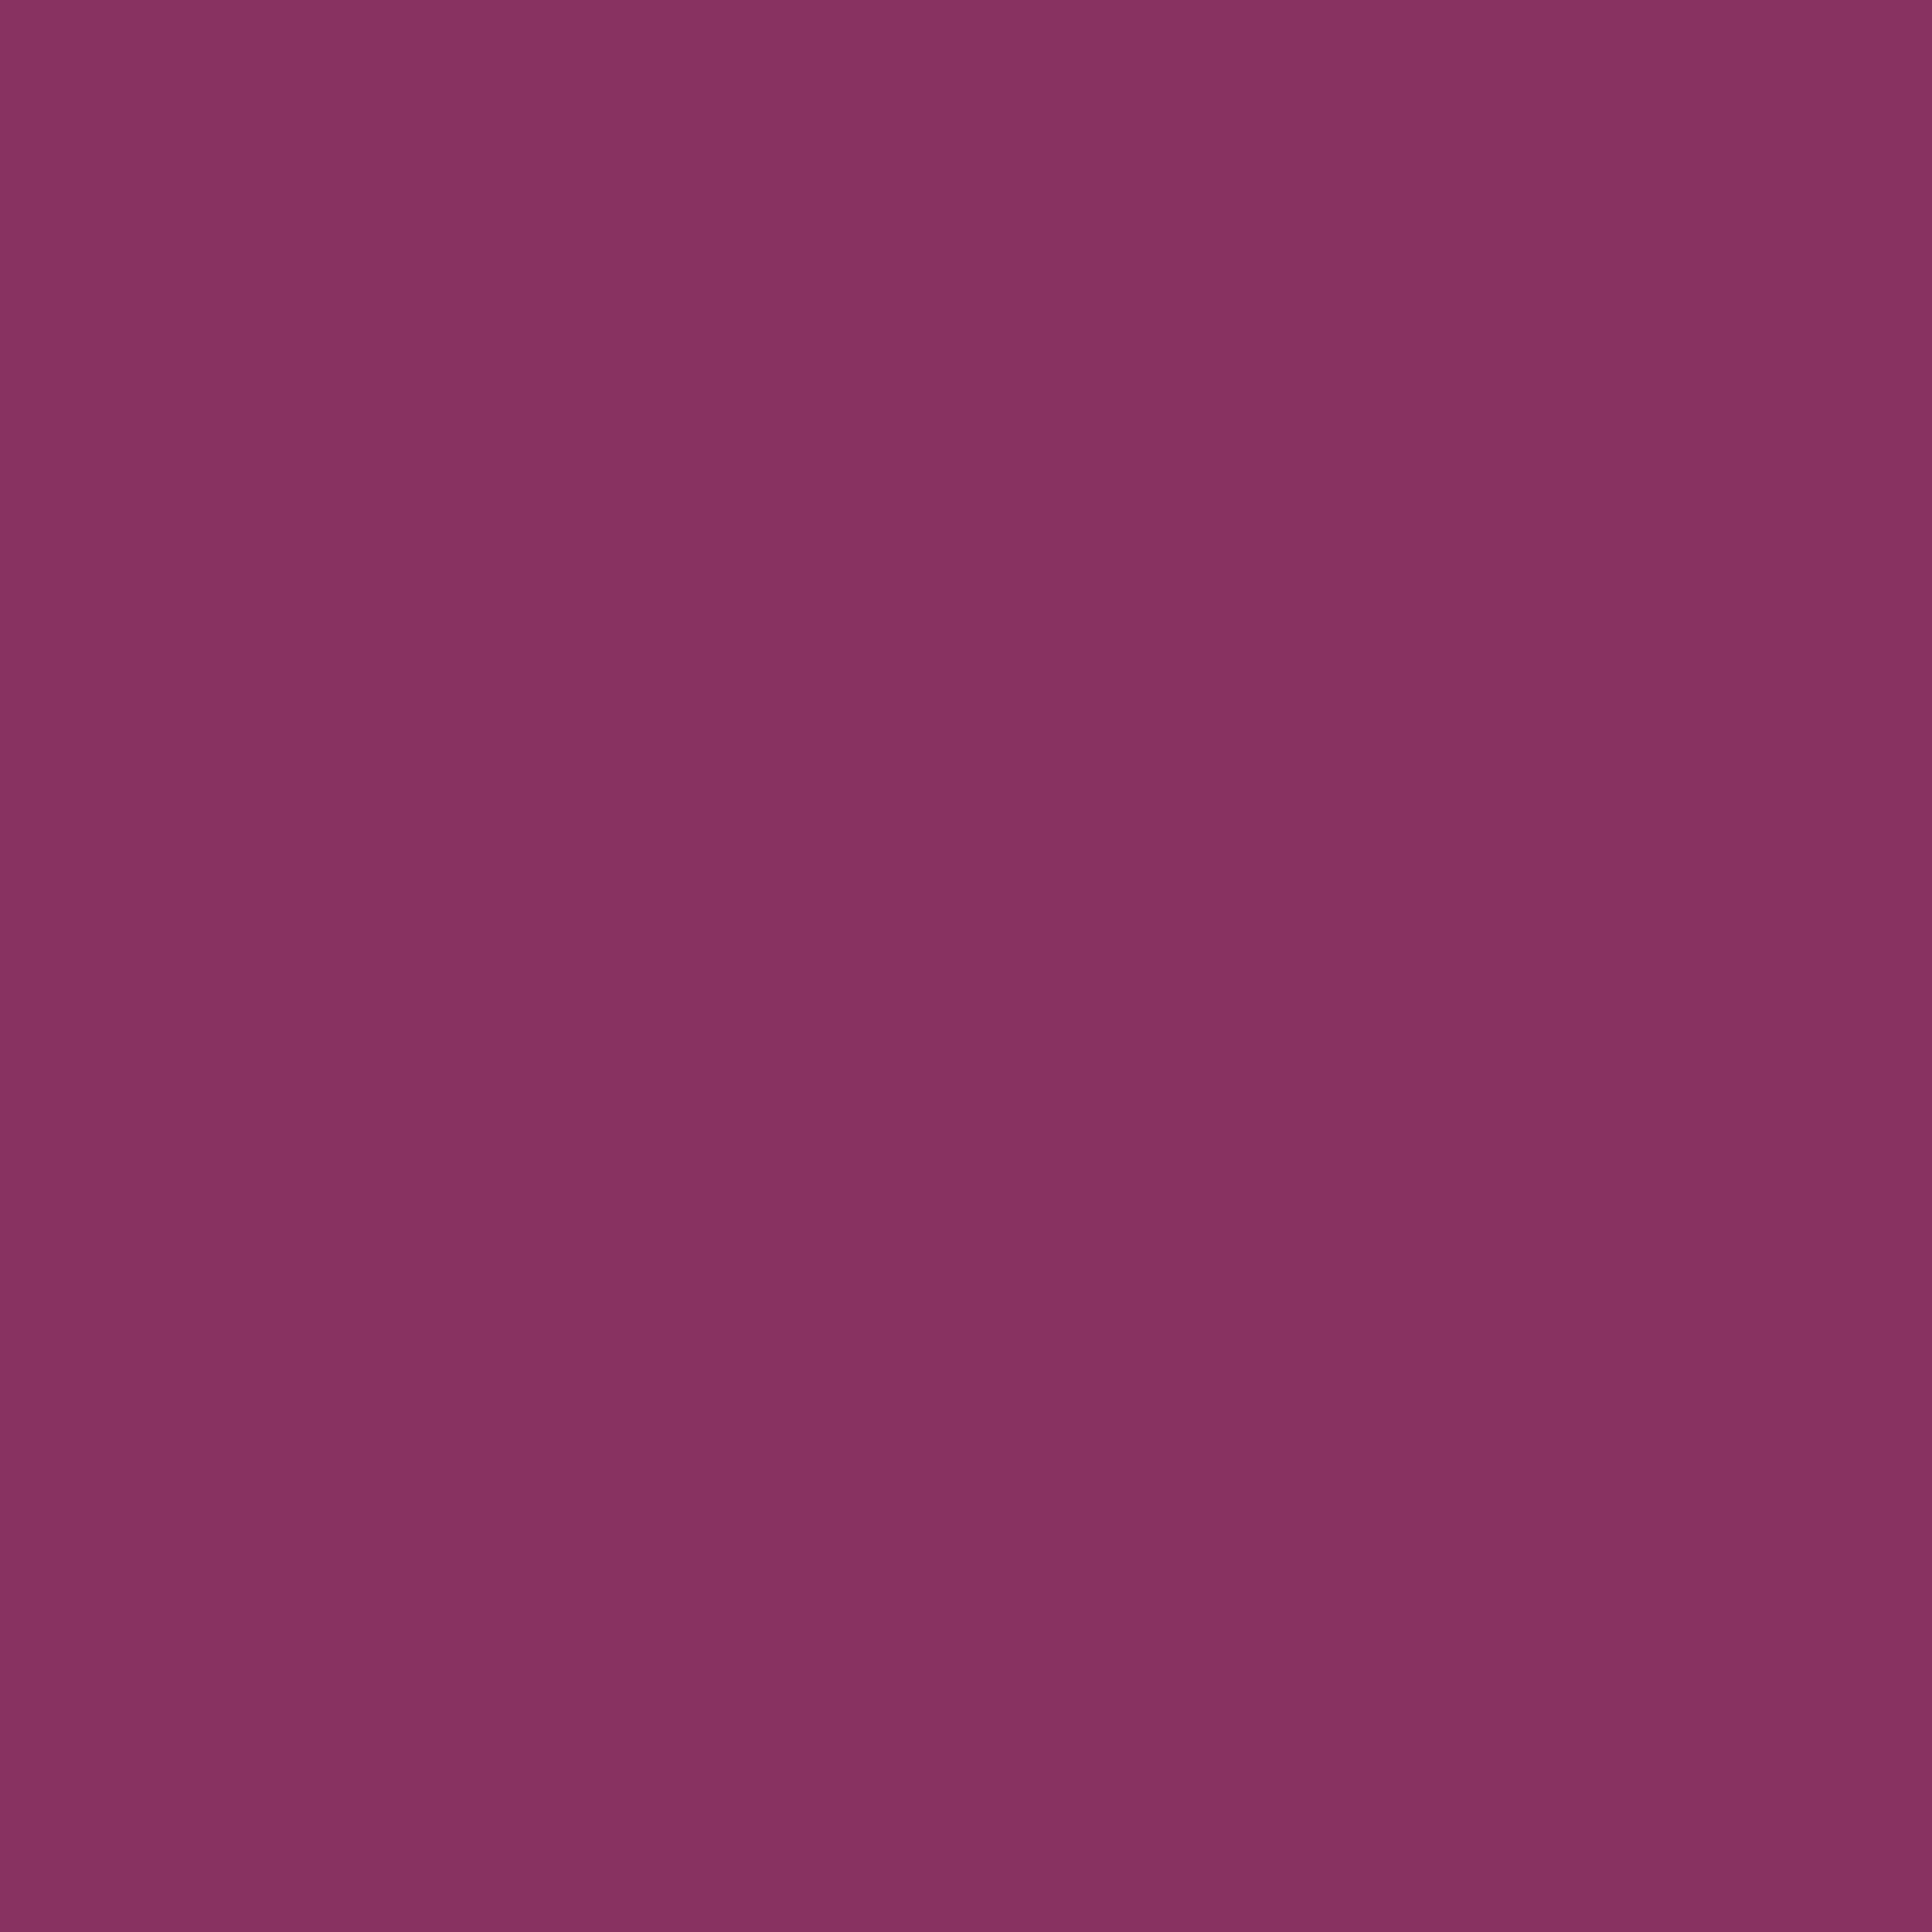 2732x2732 Boysenberry Solid Color Background